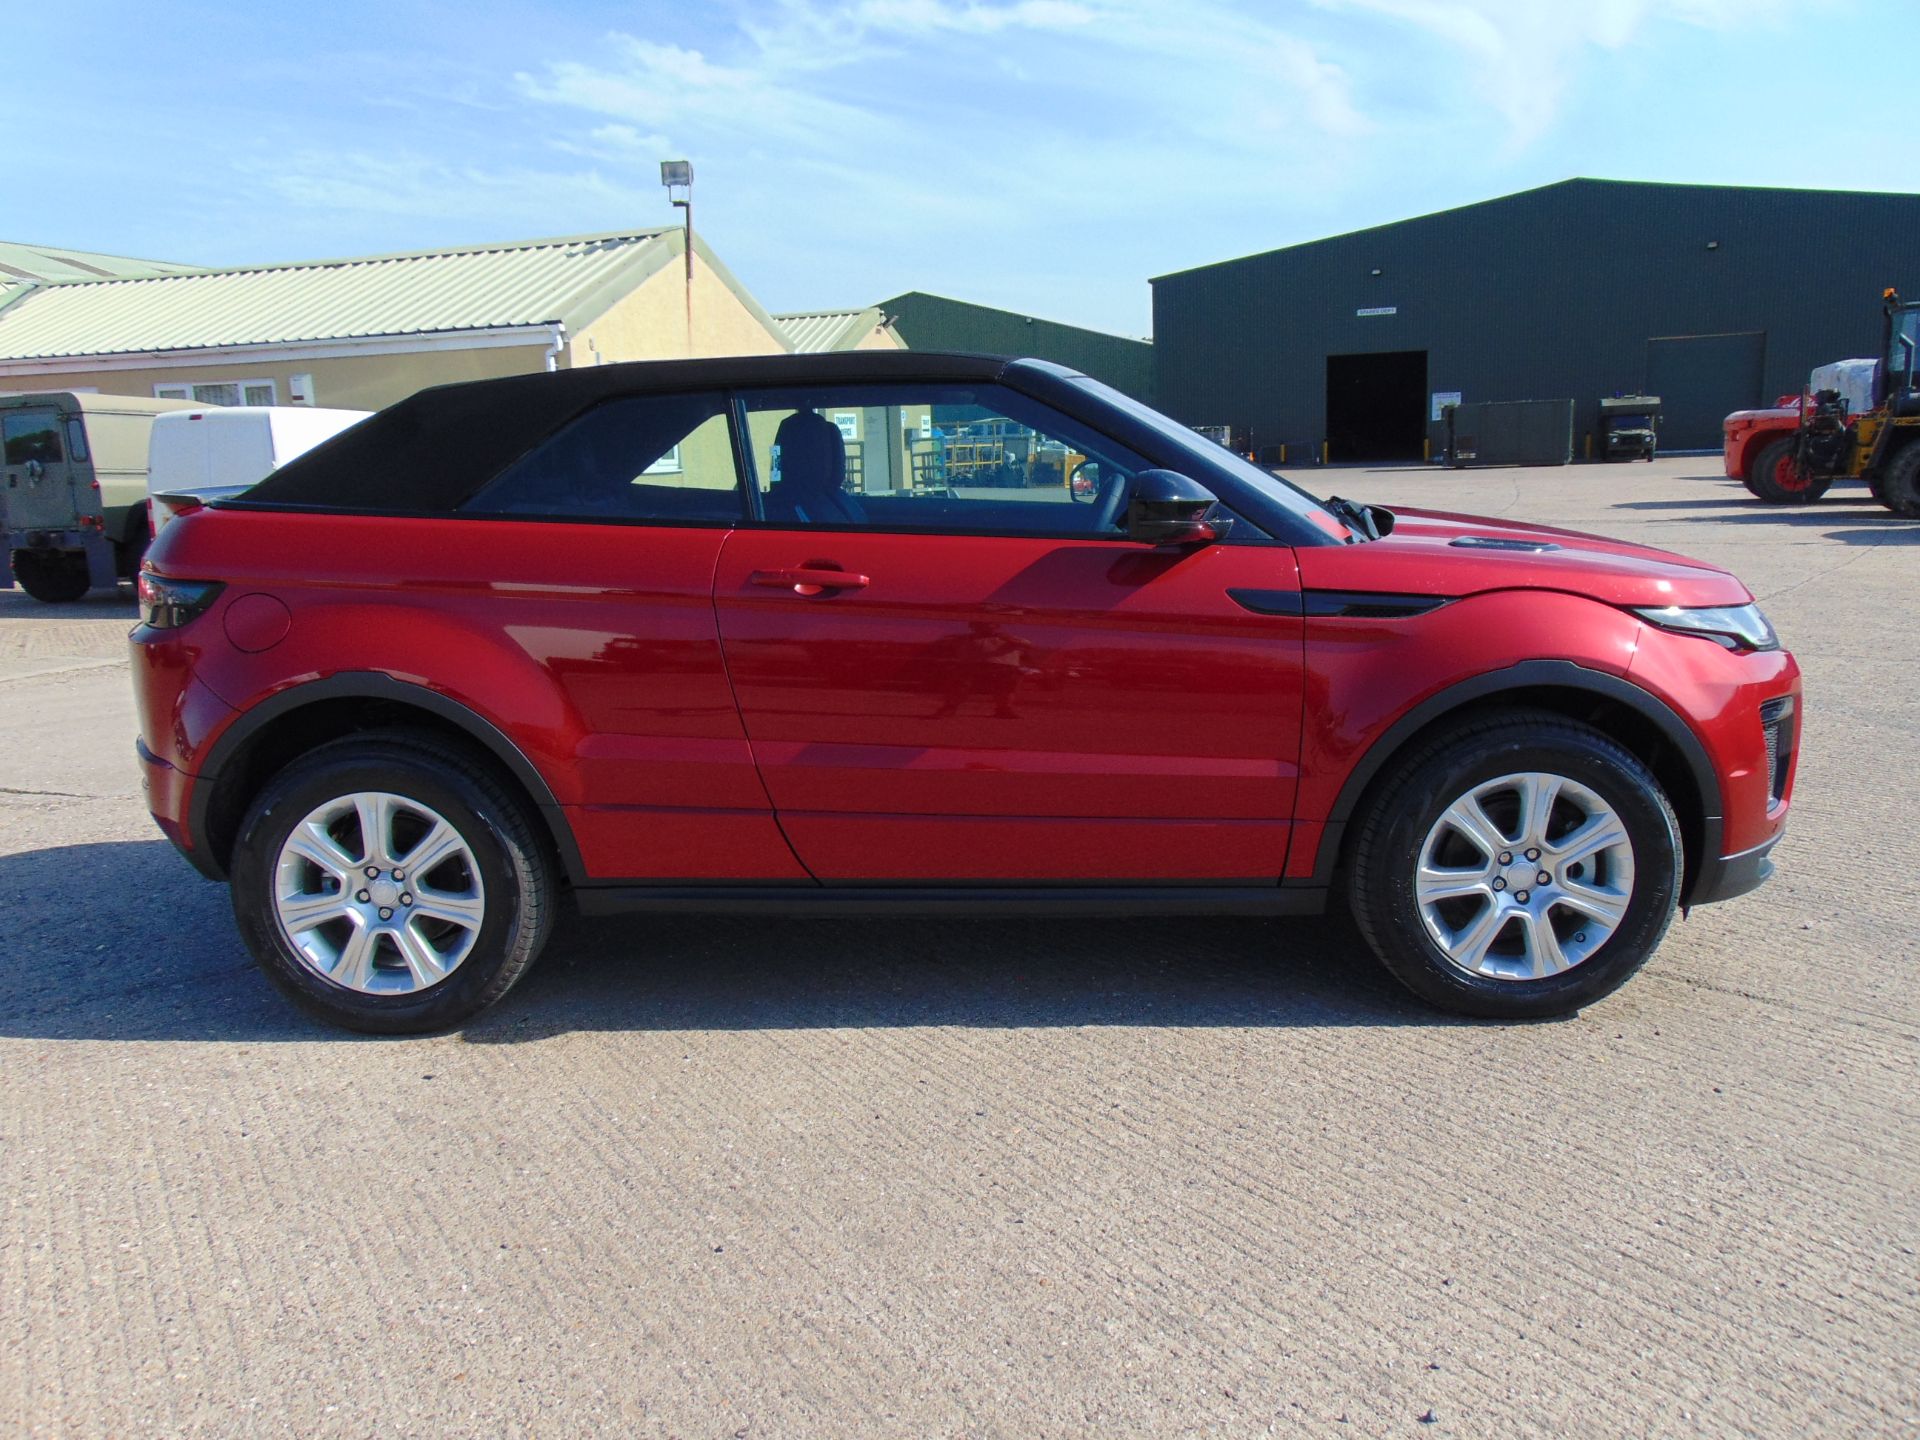 NEW UNUSED Range Rover Evoque 2.0 i4 HSE Dynamic Convertible - Image 12 of 39